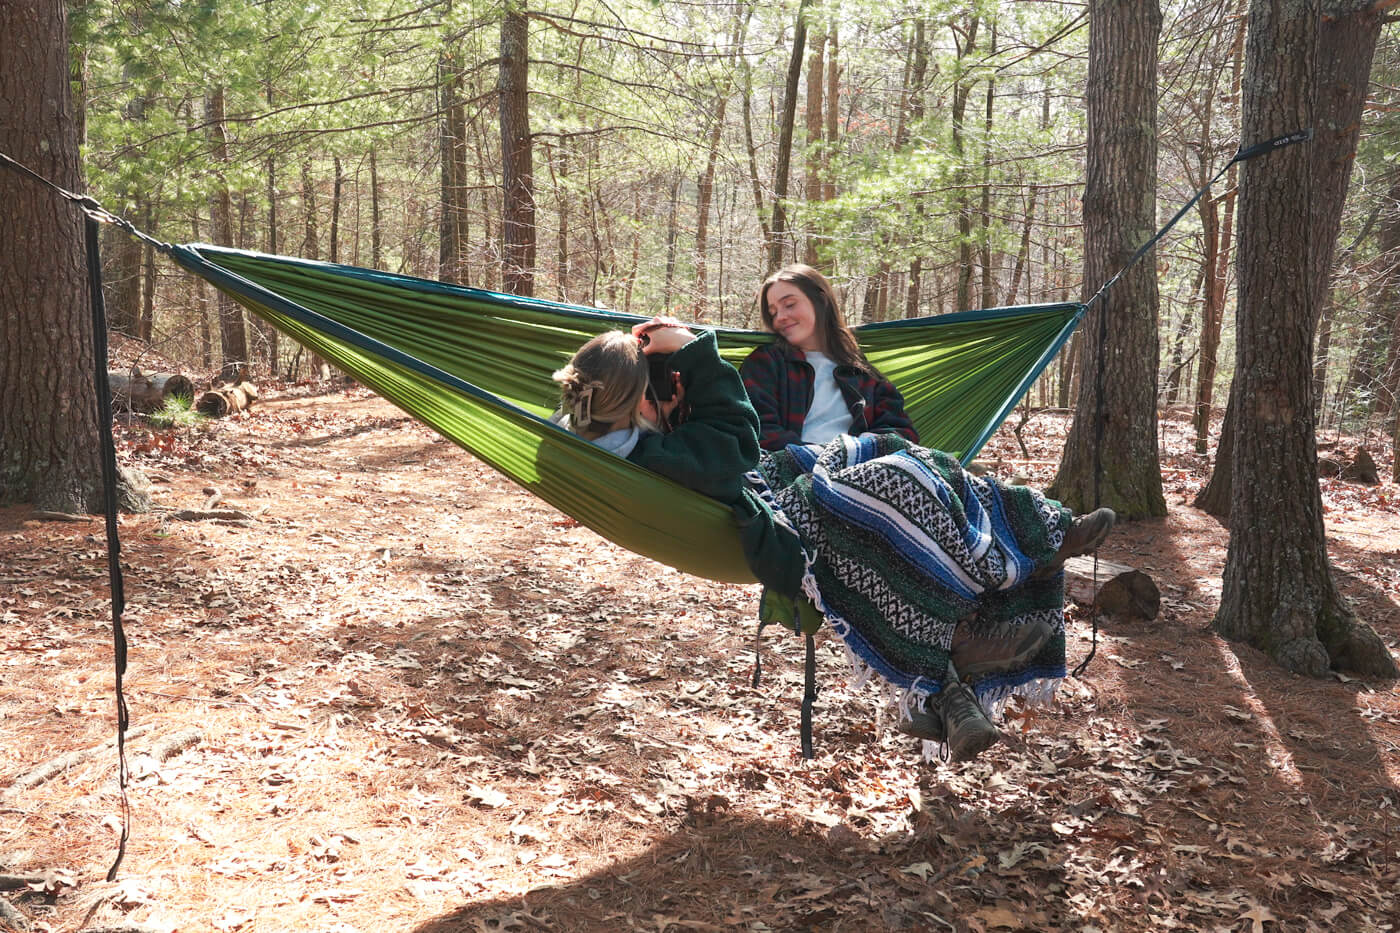 Two women share an ENO DoubleNest hammock as one takes a photo of the other. 